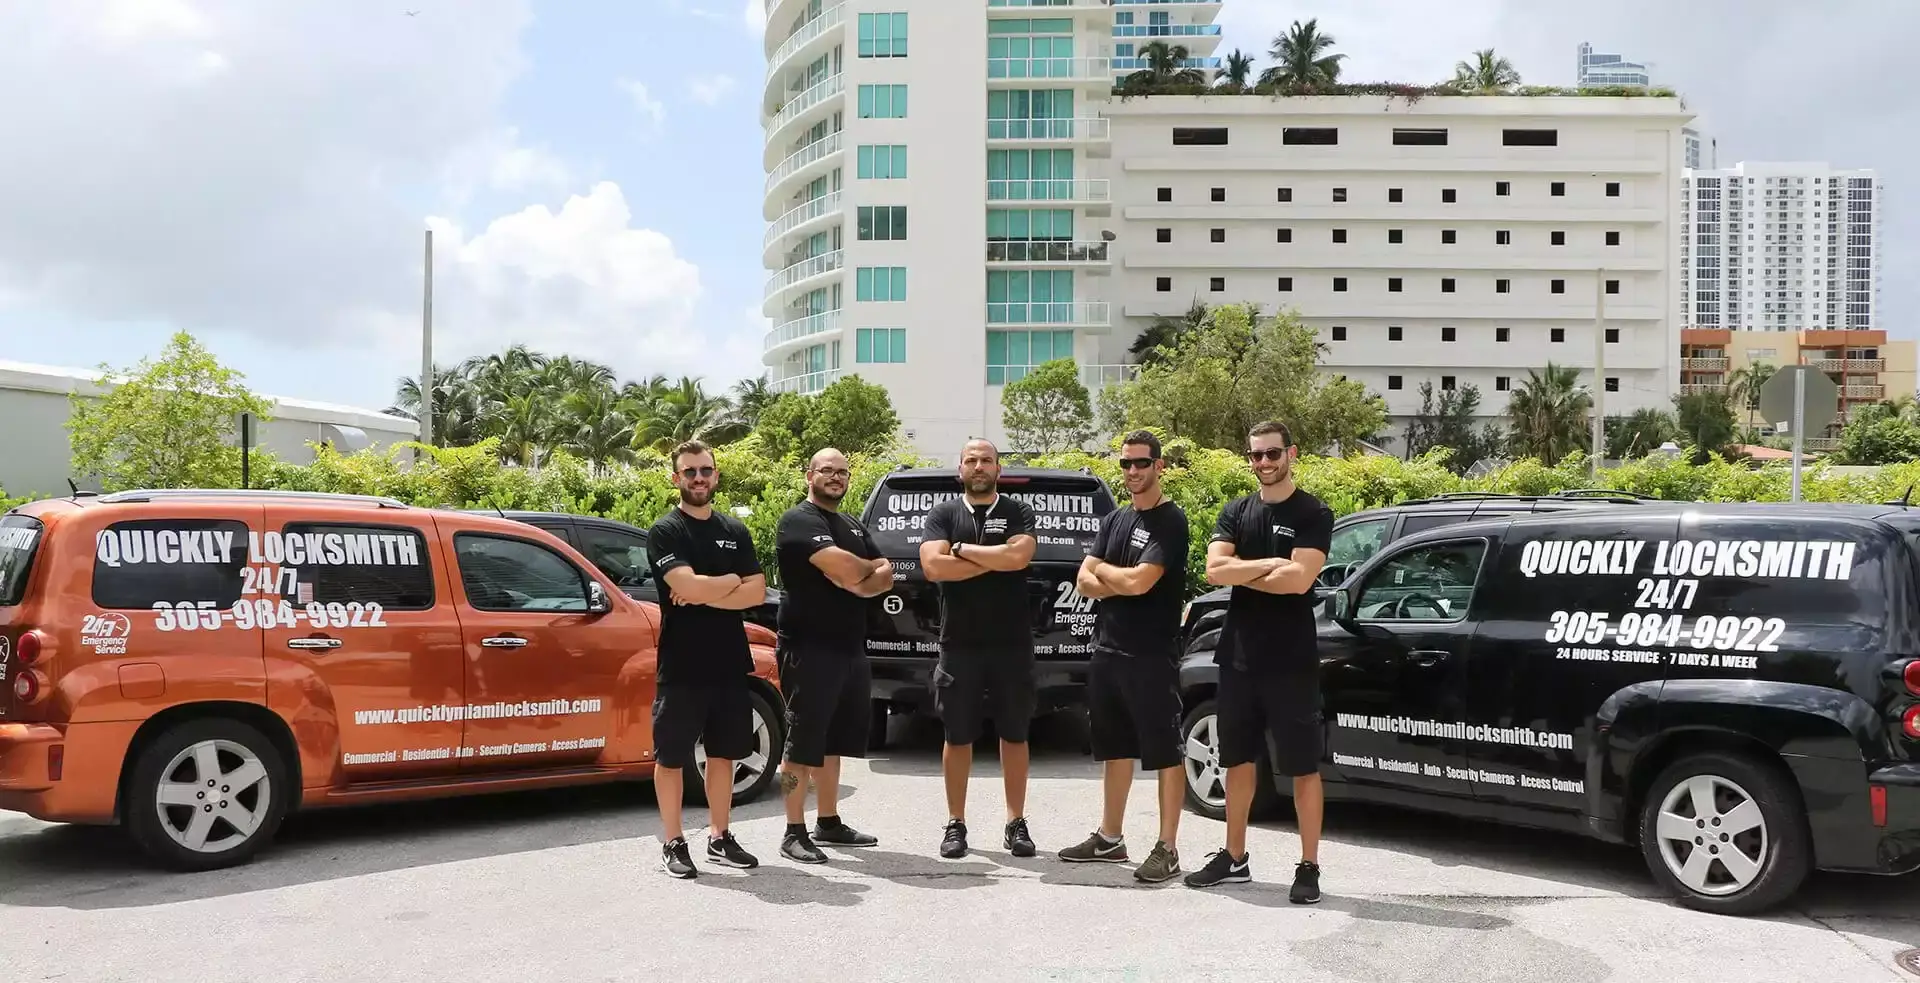 Quickly Locksmith team outside their cars